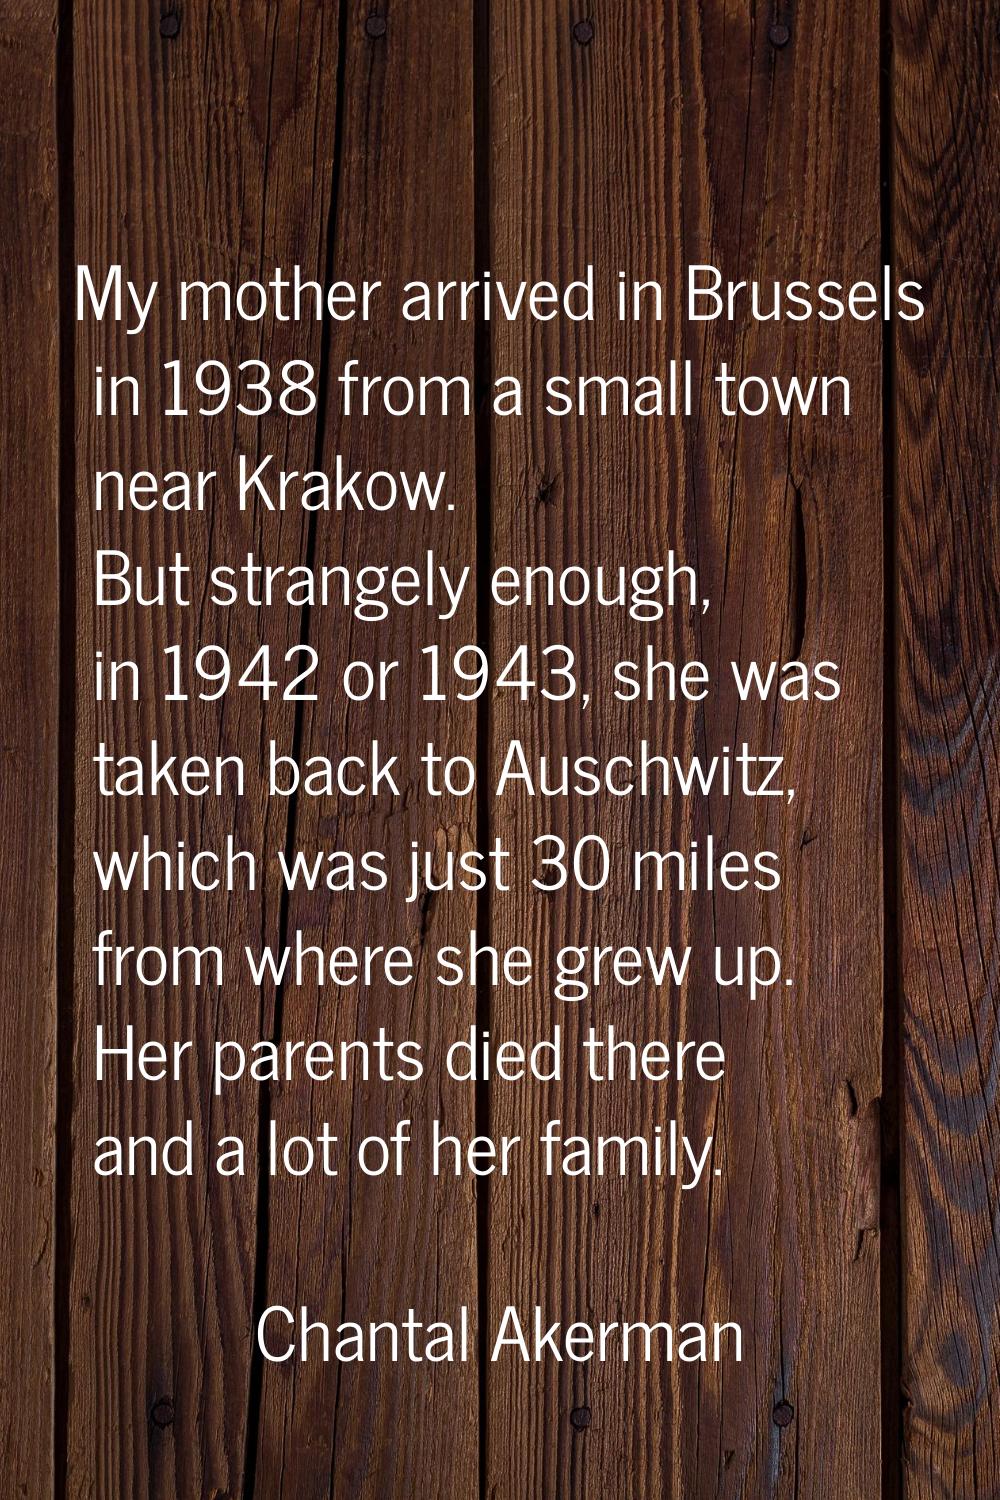 My mother arrived in Brussels in 1938 from a small town near Krakow. But strangely enough, in 1942 